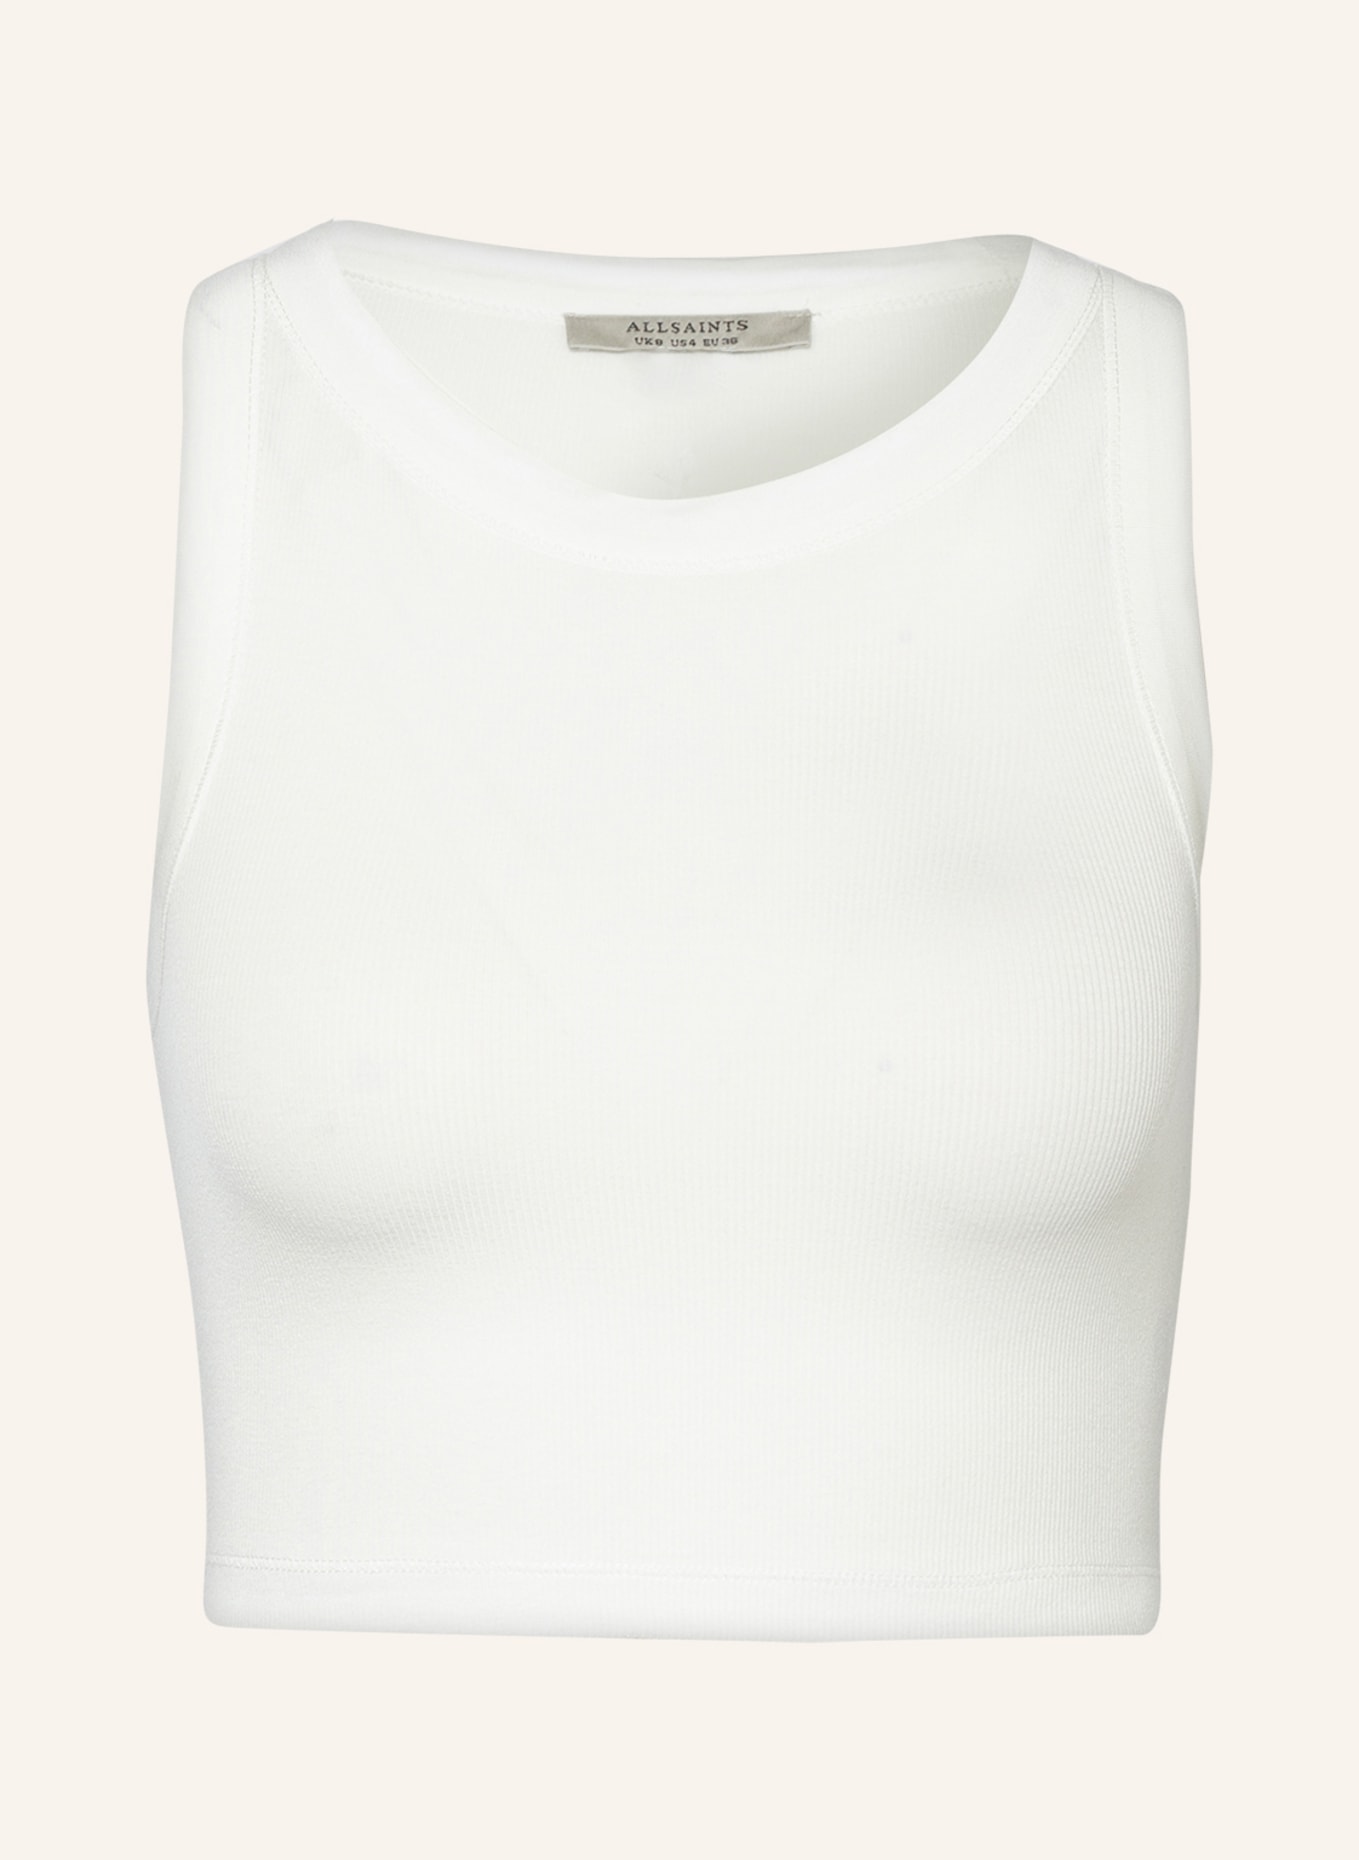 ALLSAINTS Cropped-Top RINA, Farbe: WEISS (Bild 1)